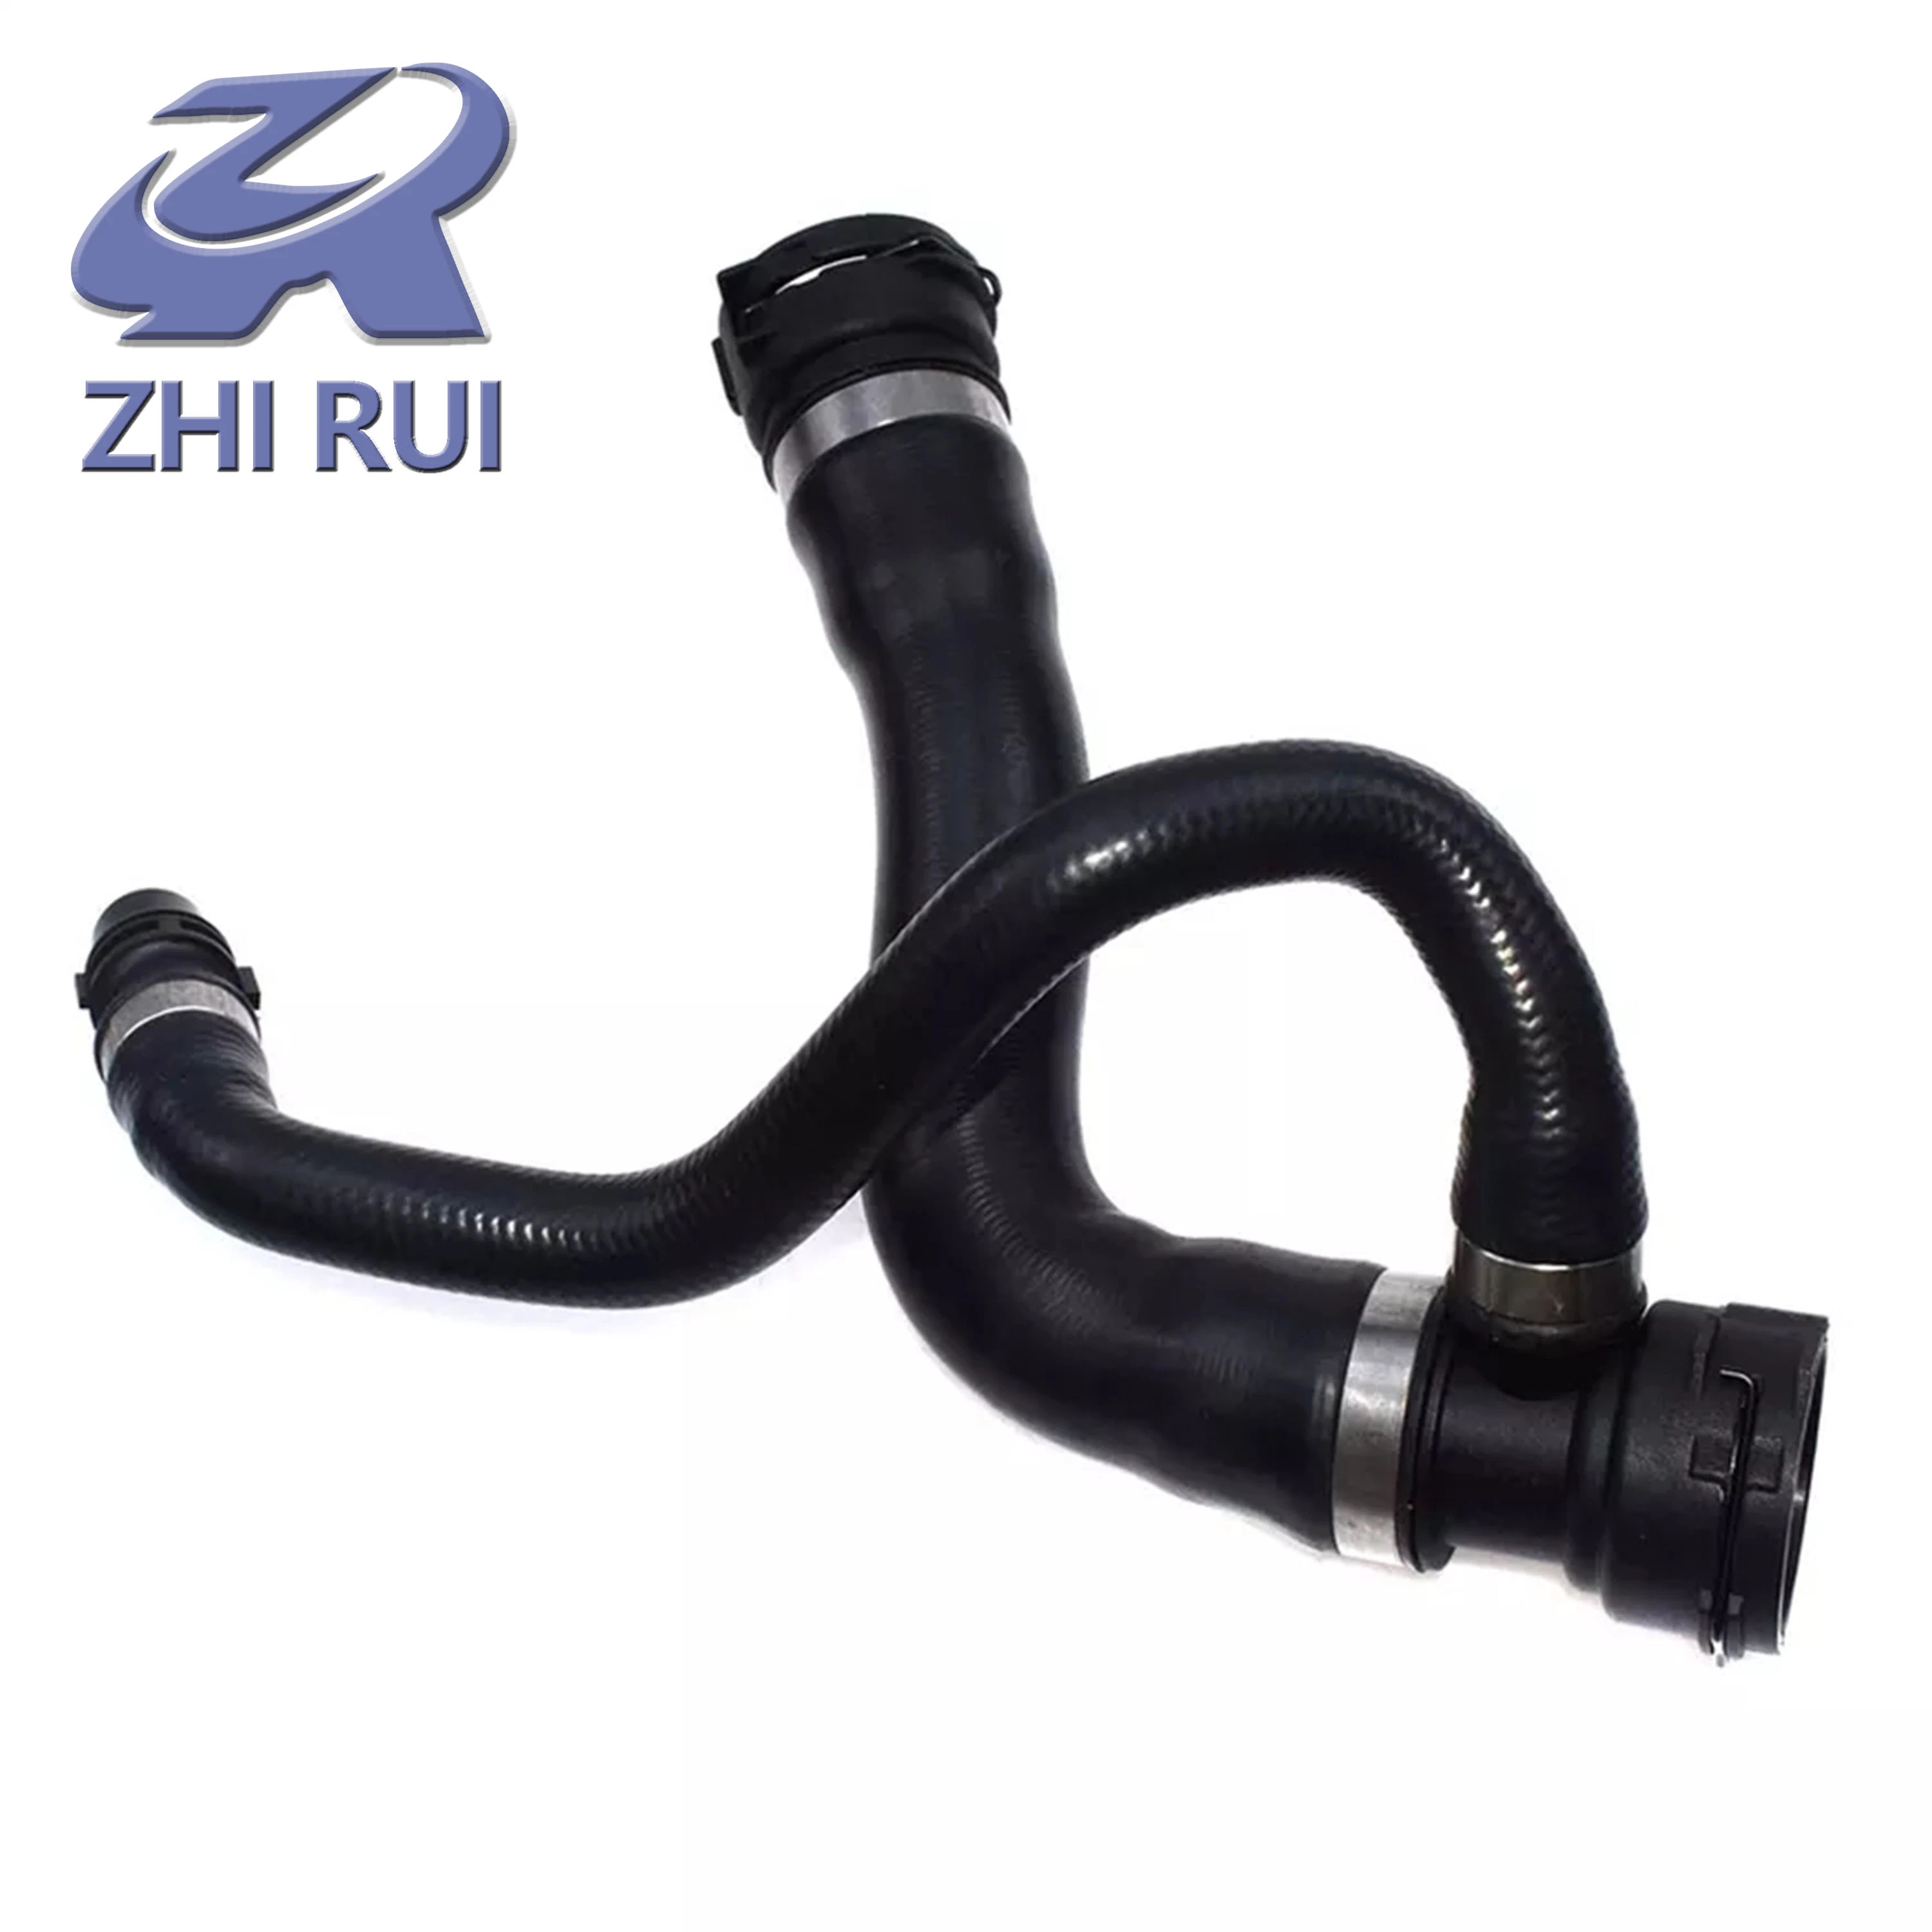 1712 7593 490 Wholesale Auto Parts Engine Coolant Radiator Hose Water Pipe for BMW E70 OEM 17127593490